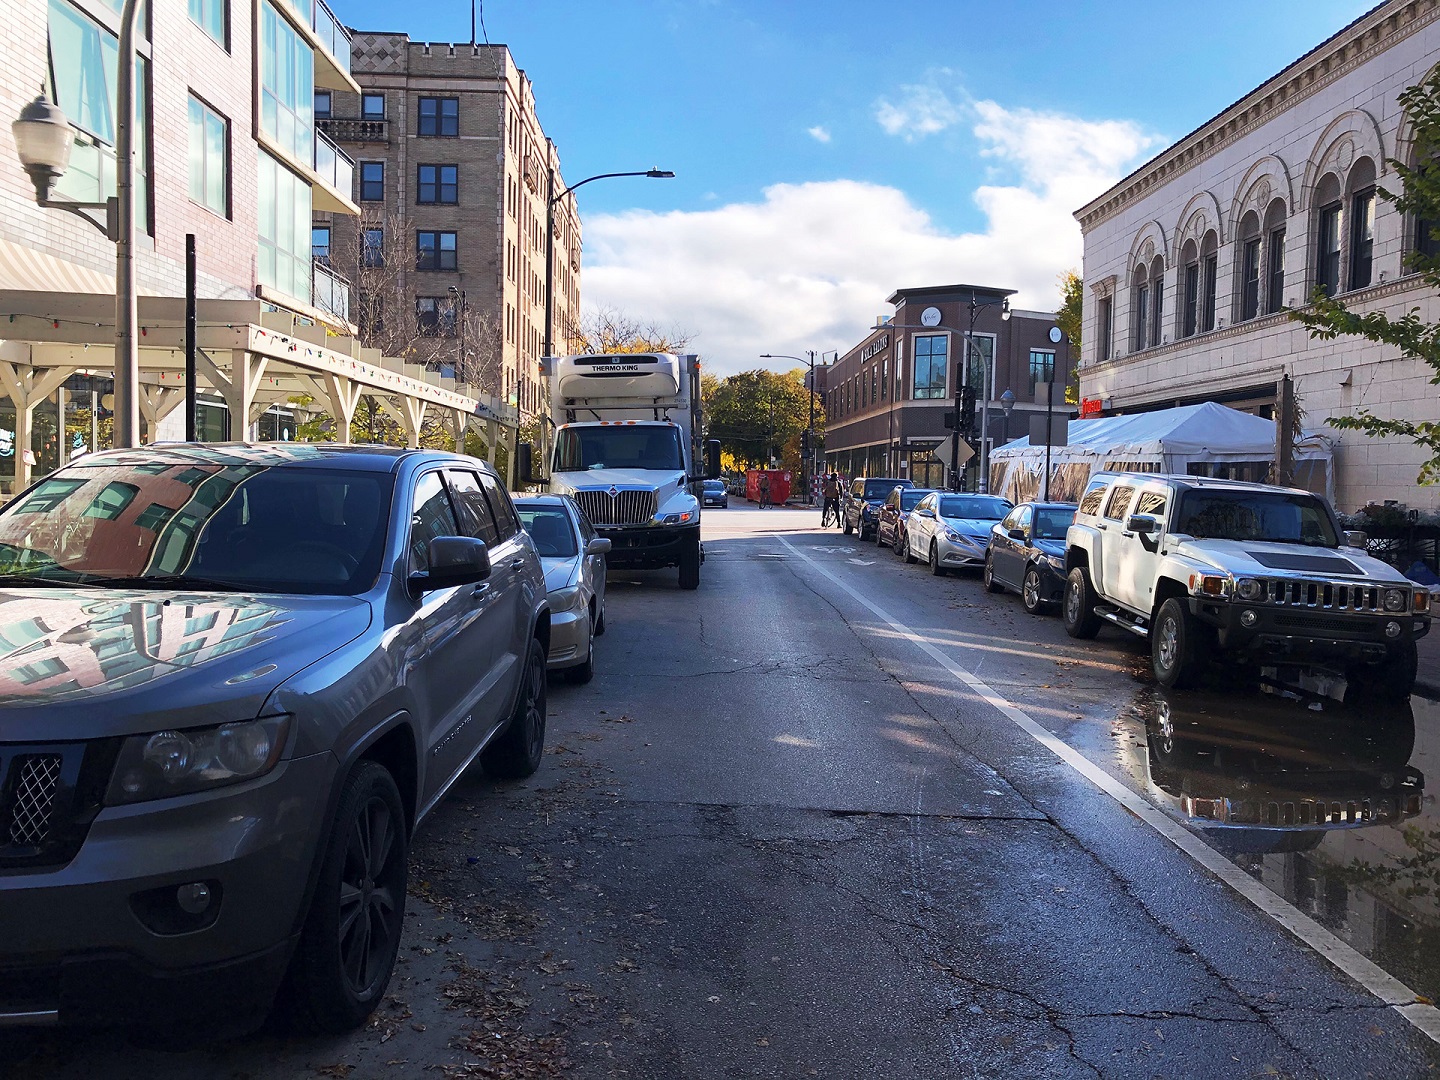 Photo of a street with cars and trucks